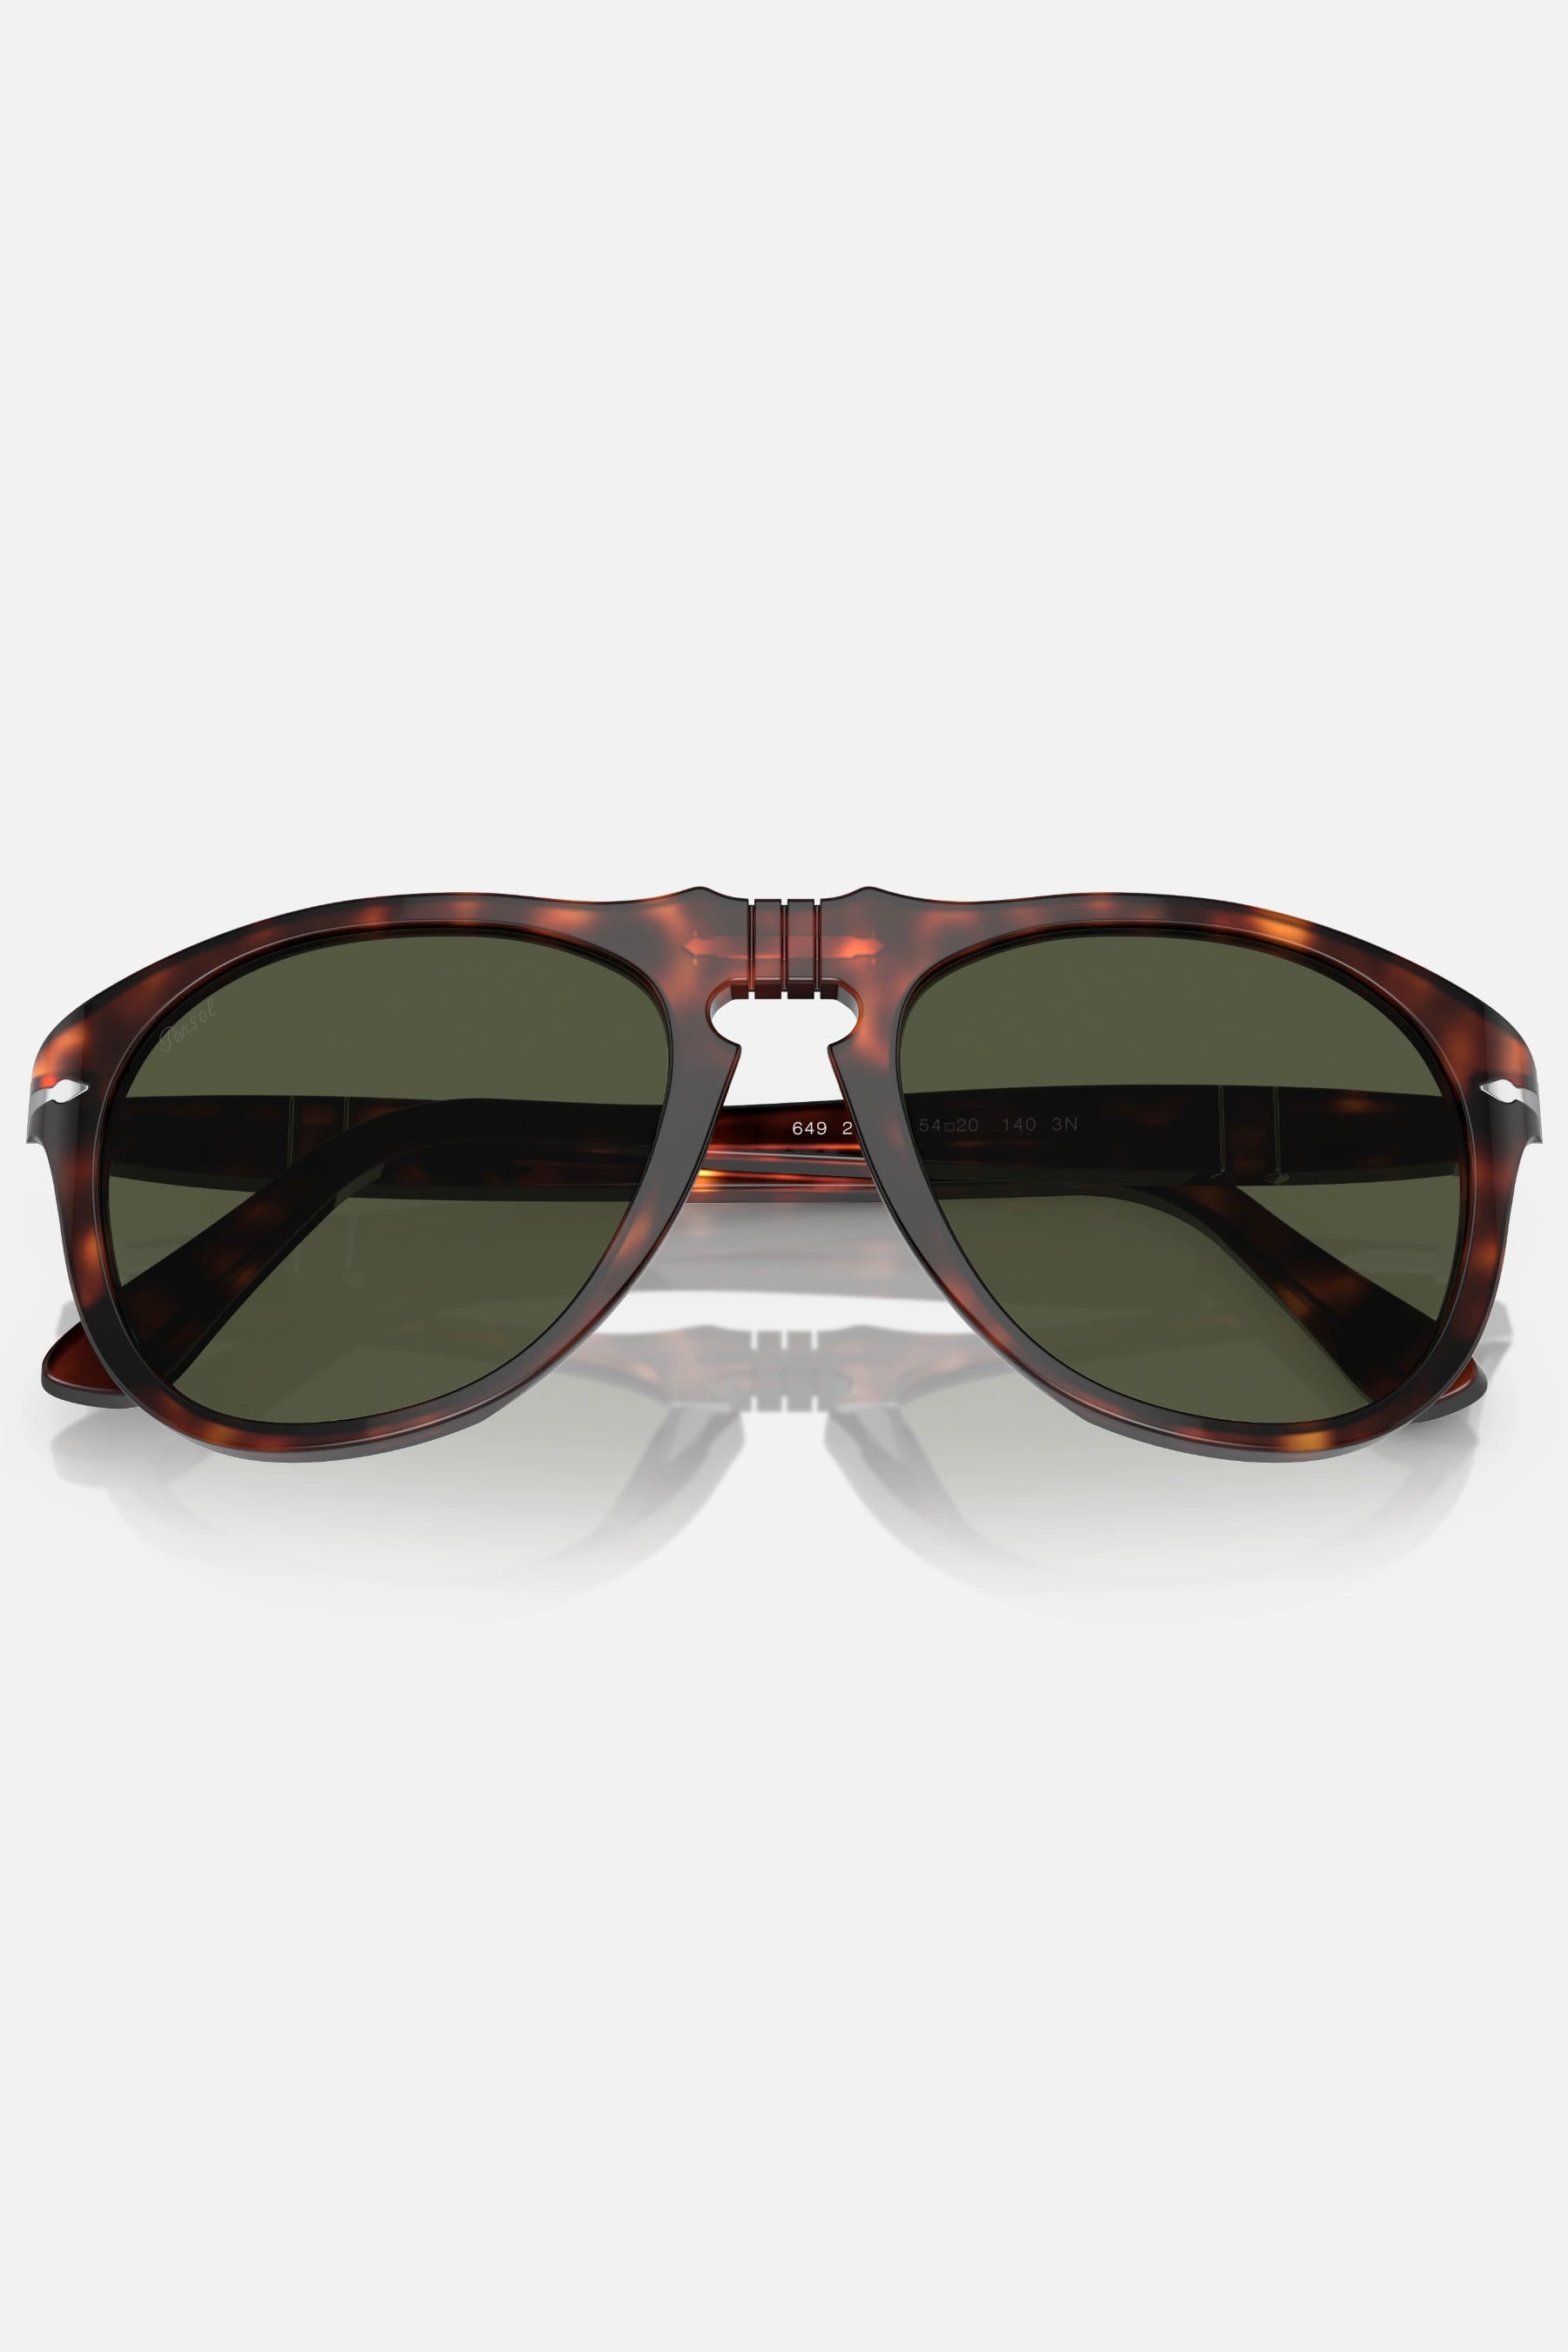 Persol PO 649 24/31 52 Icons